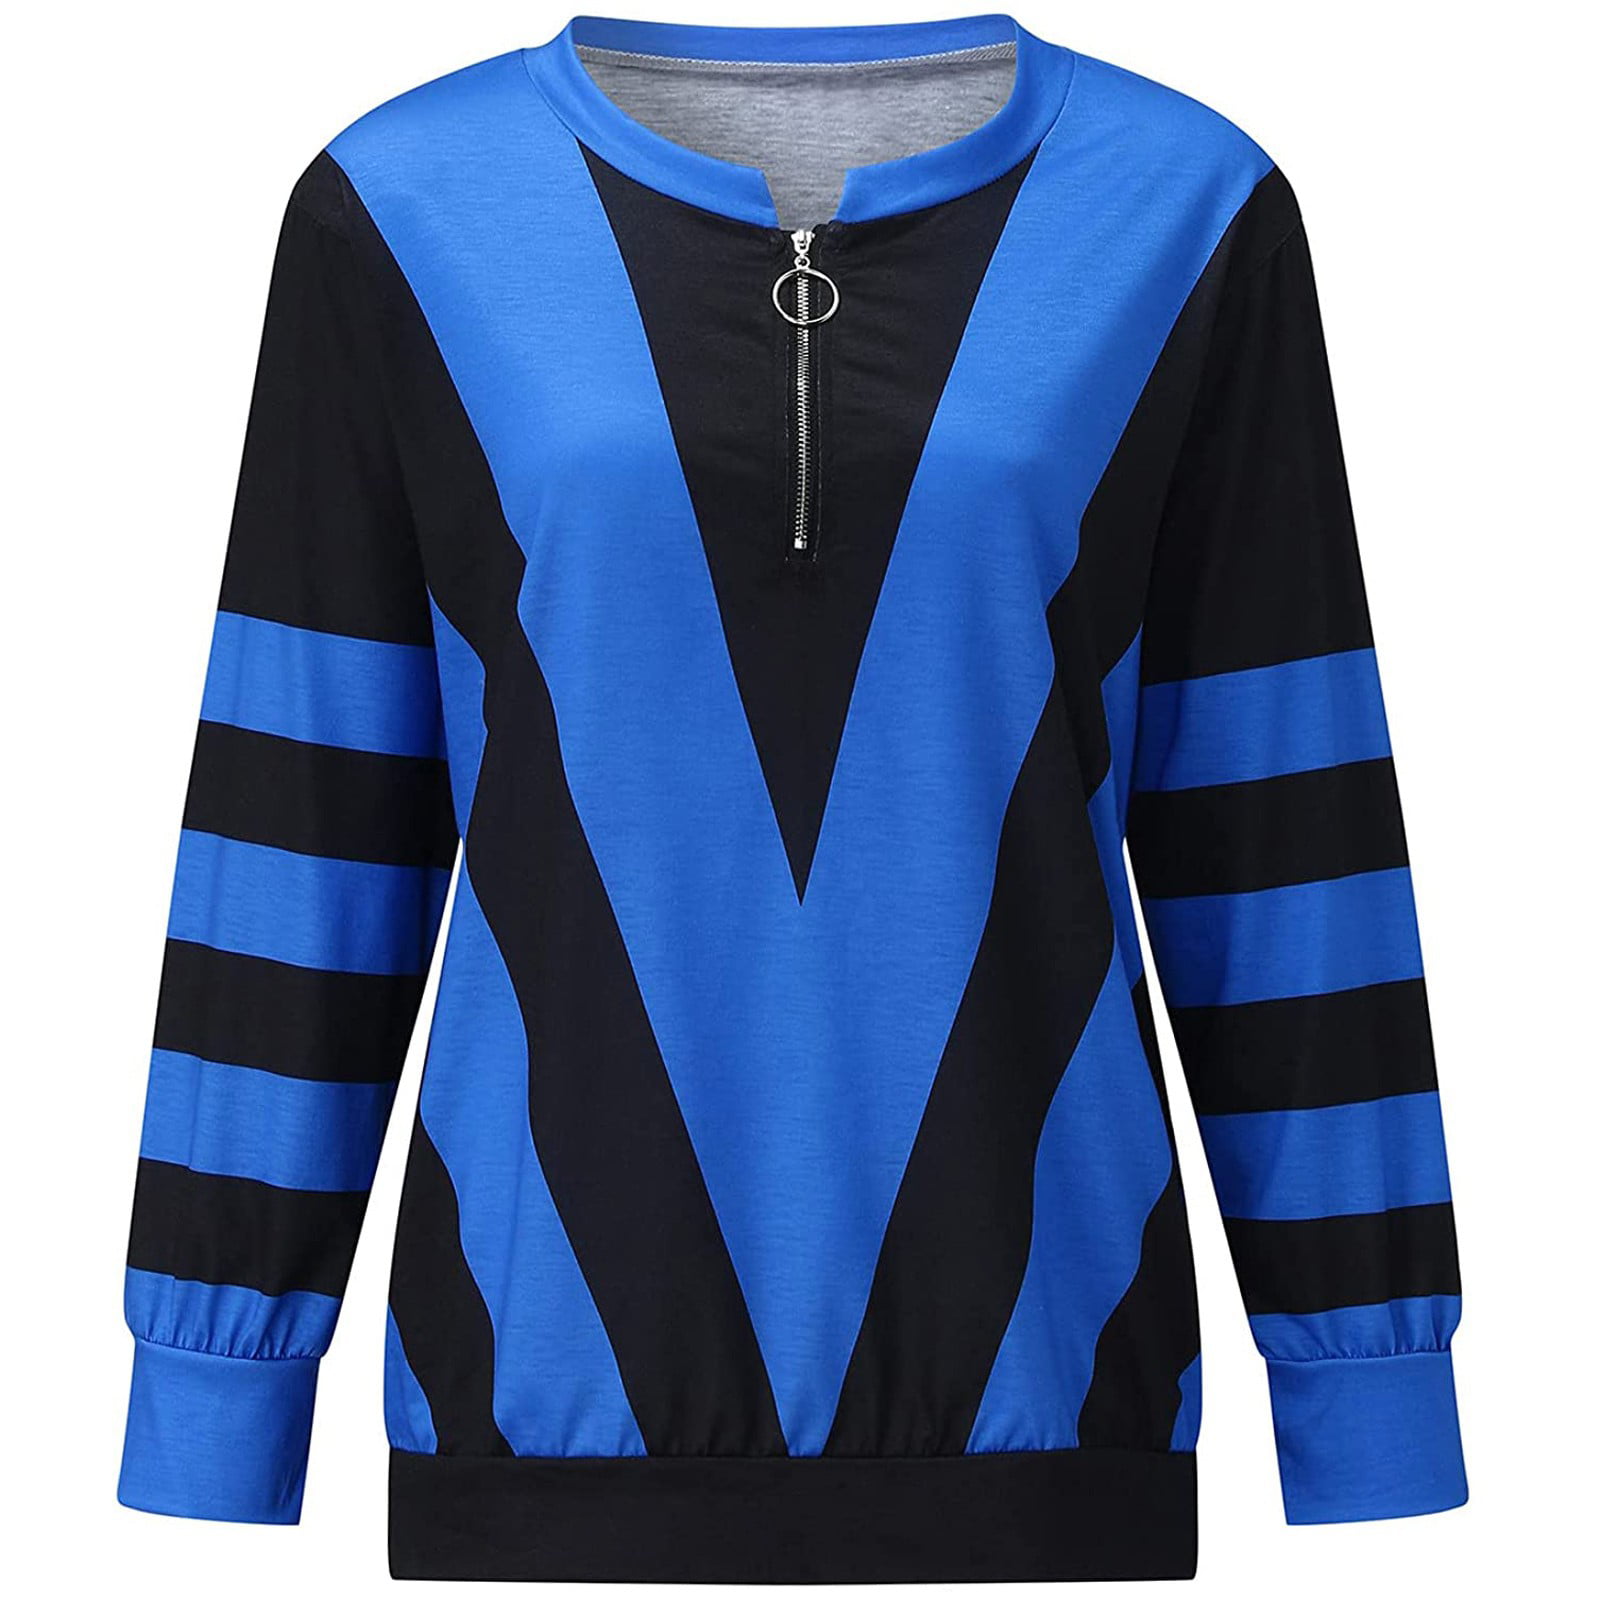 V Neck Long Sleeve Tops for Women Plus Size Fashion Color Block Striped  Graphic Print Tunic Tee Casual Pullover Shirts（Blue,XXXXL) 